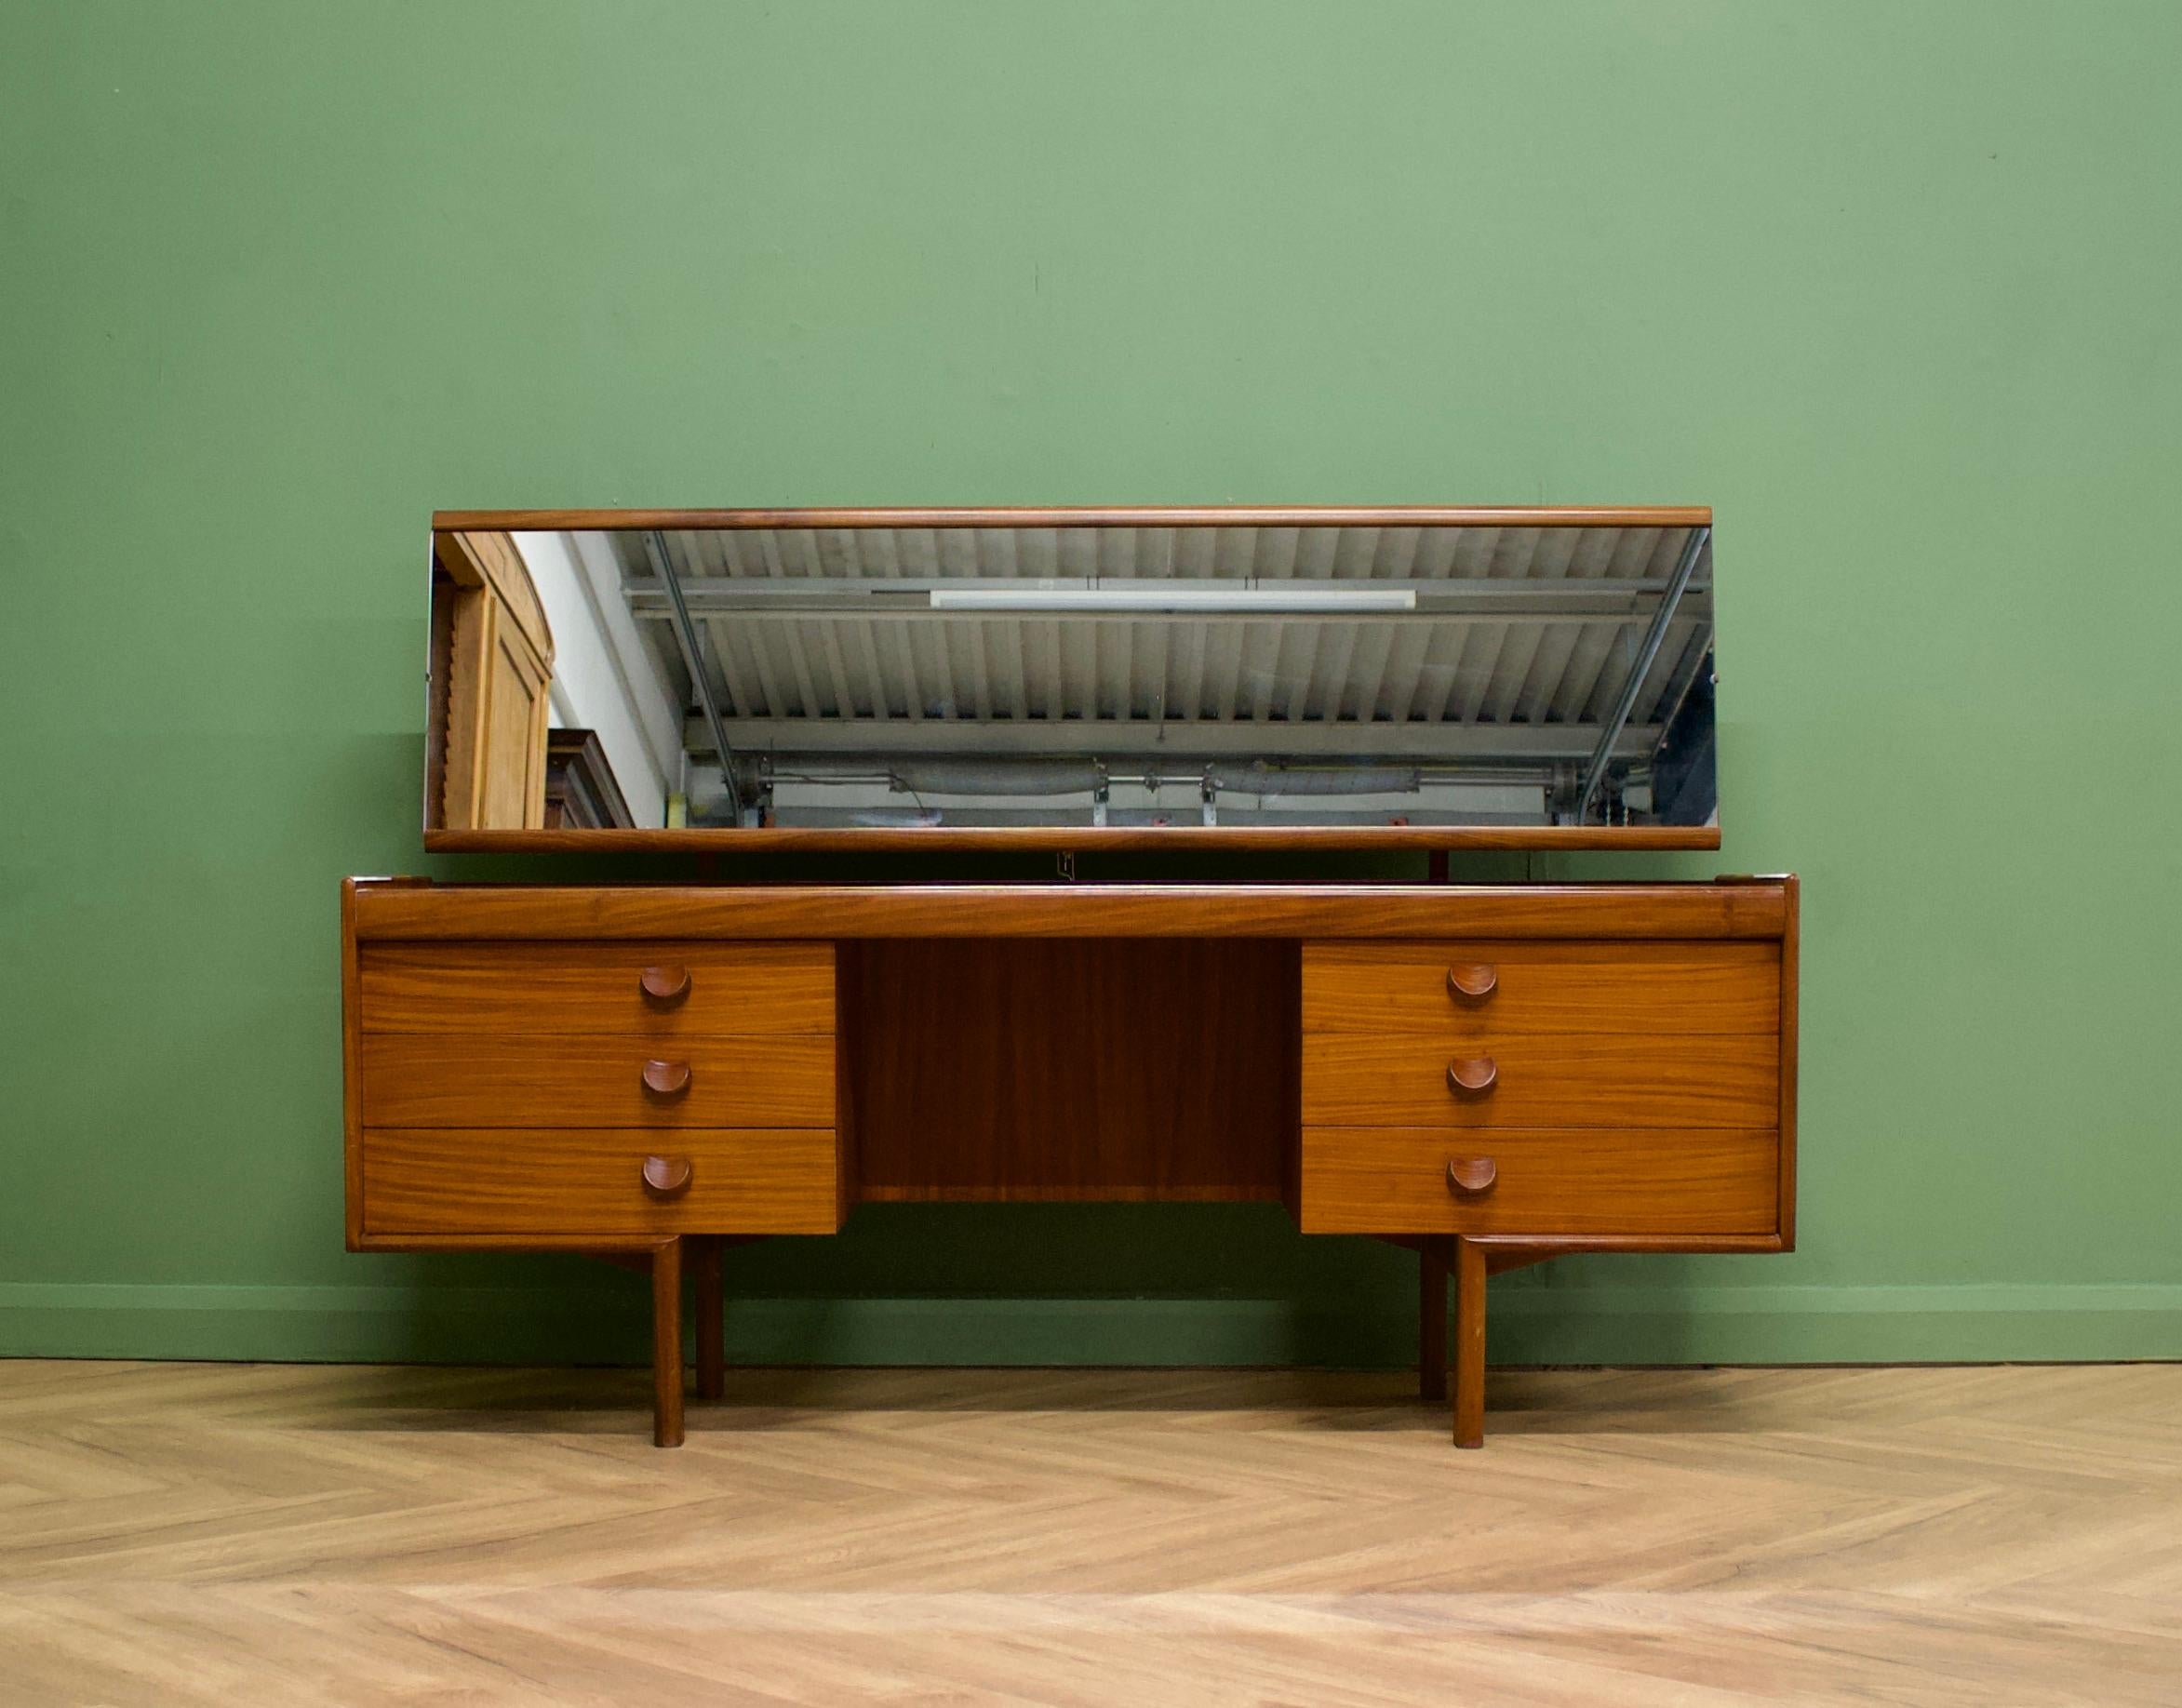 A mid century teak dressing table from White & Newton
Featuring four drawers and a tilting mirror

- height to the top of the mirror 110cm